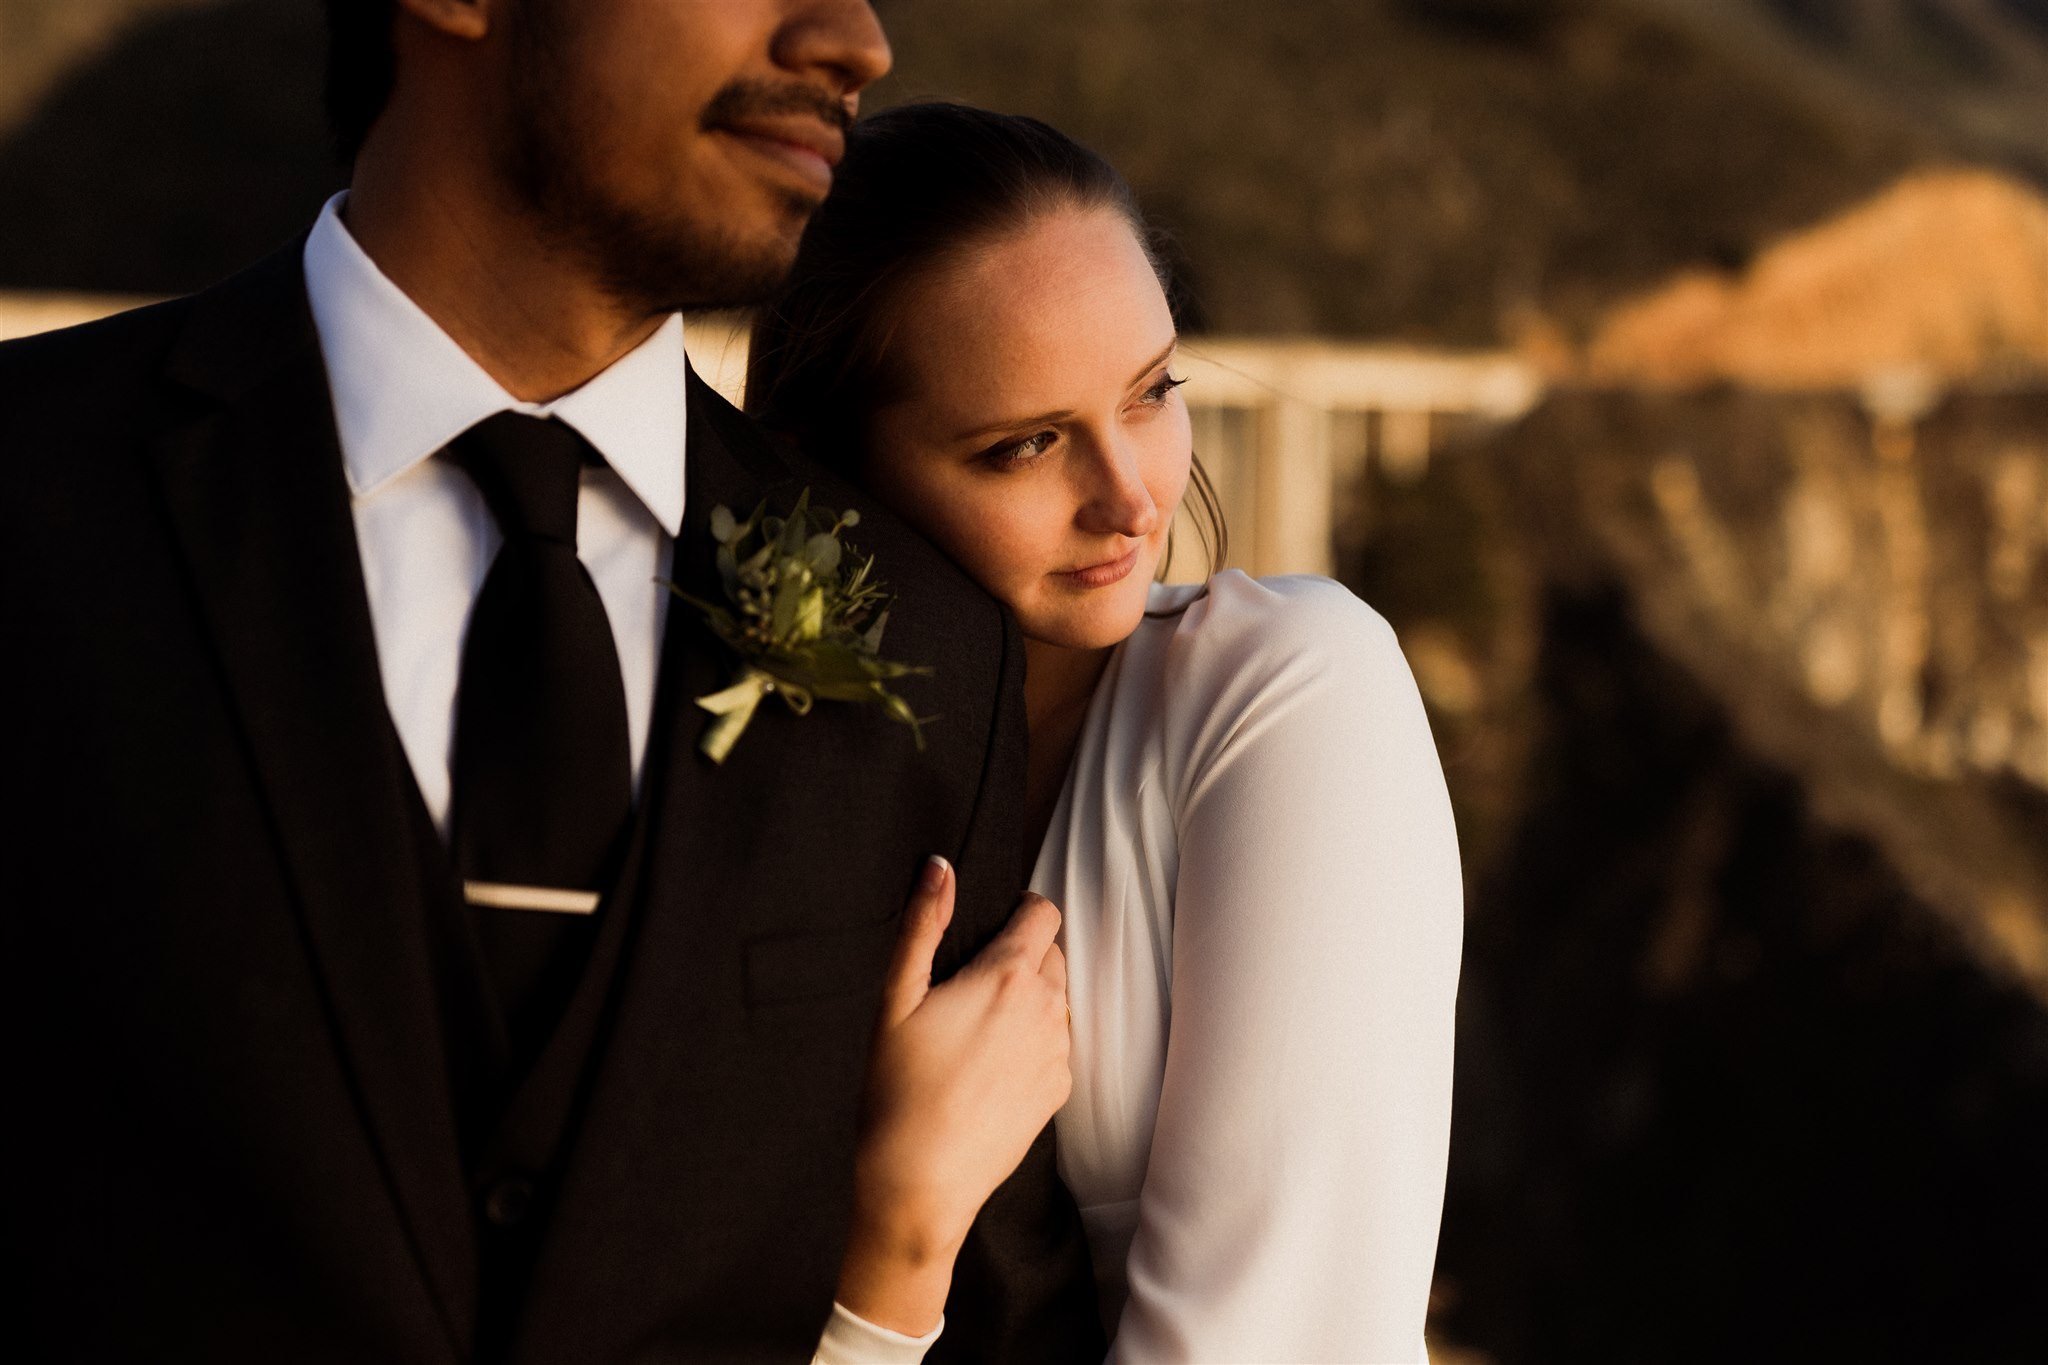 068_Two-Day Big Sur Redwoods Elopement with Family_Will Khoury Elopement Photographer.jpg